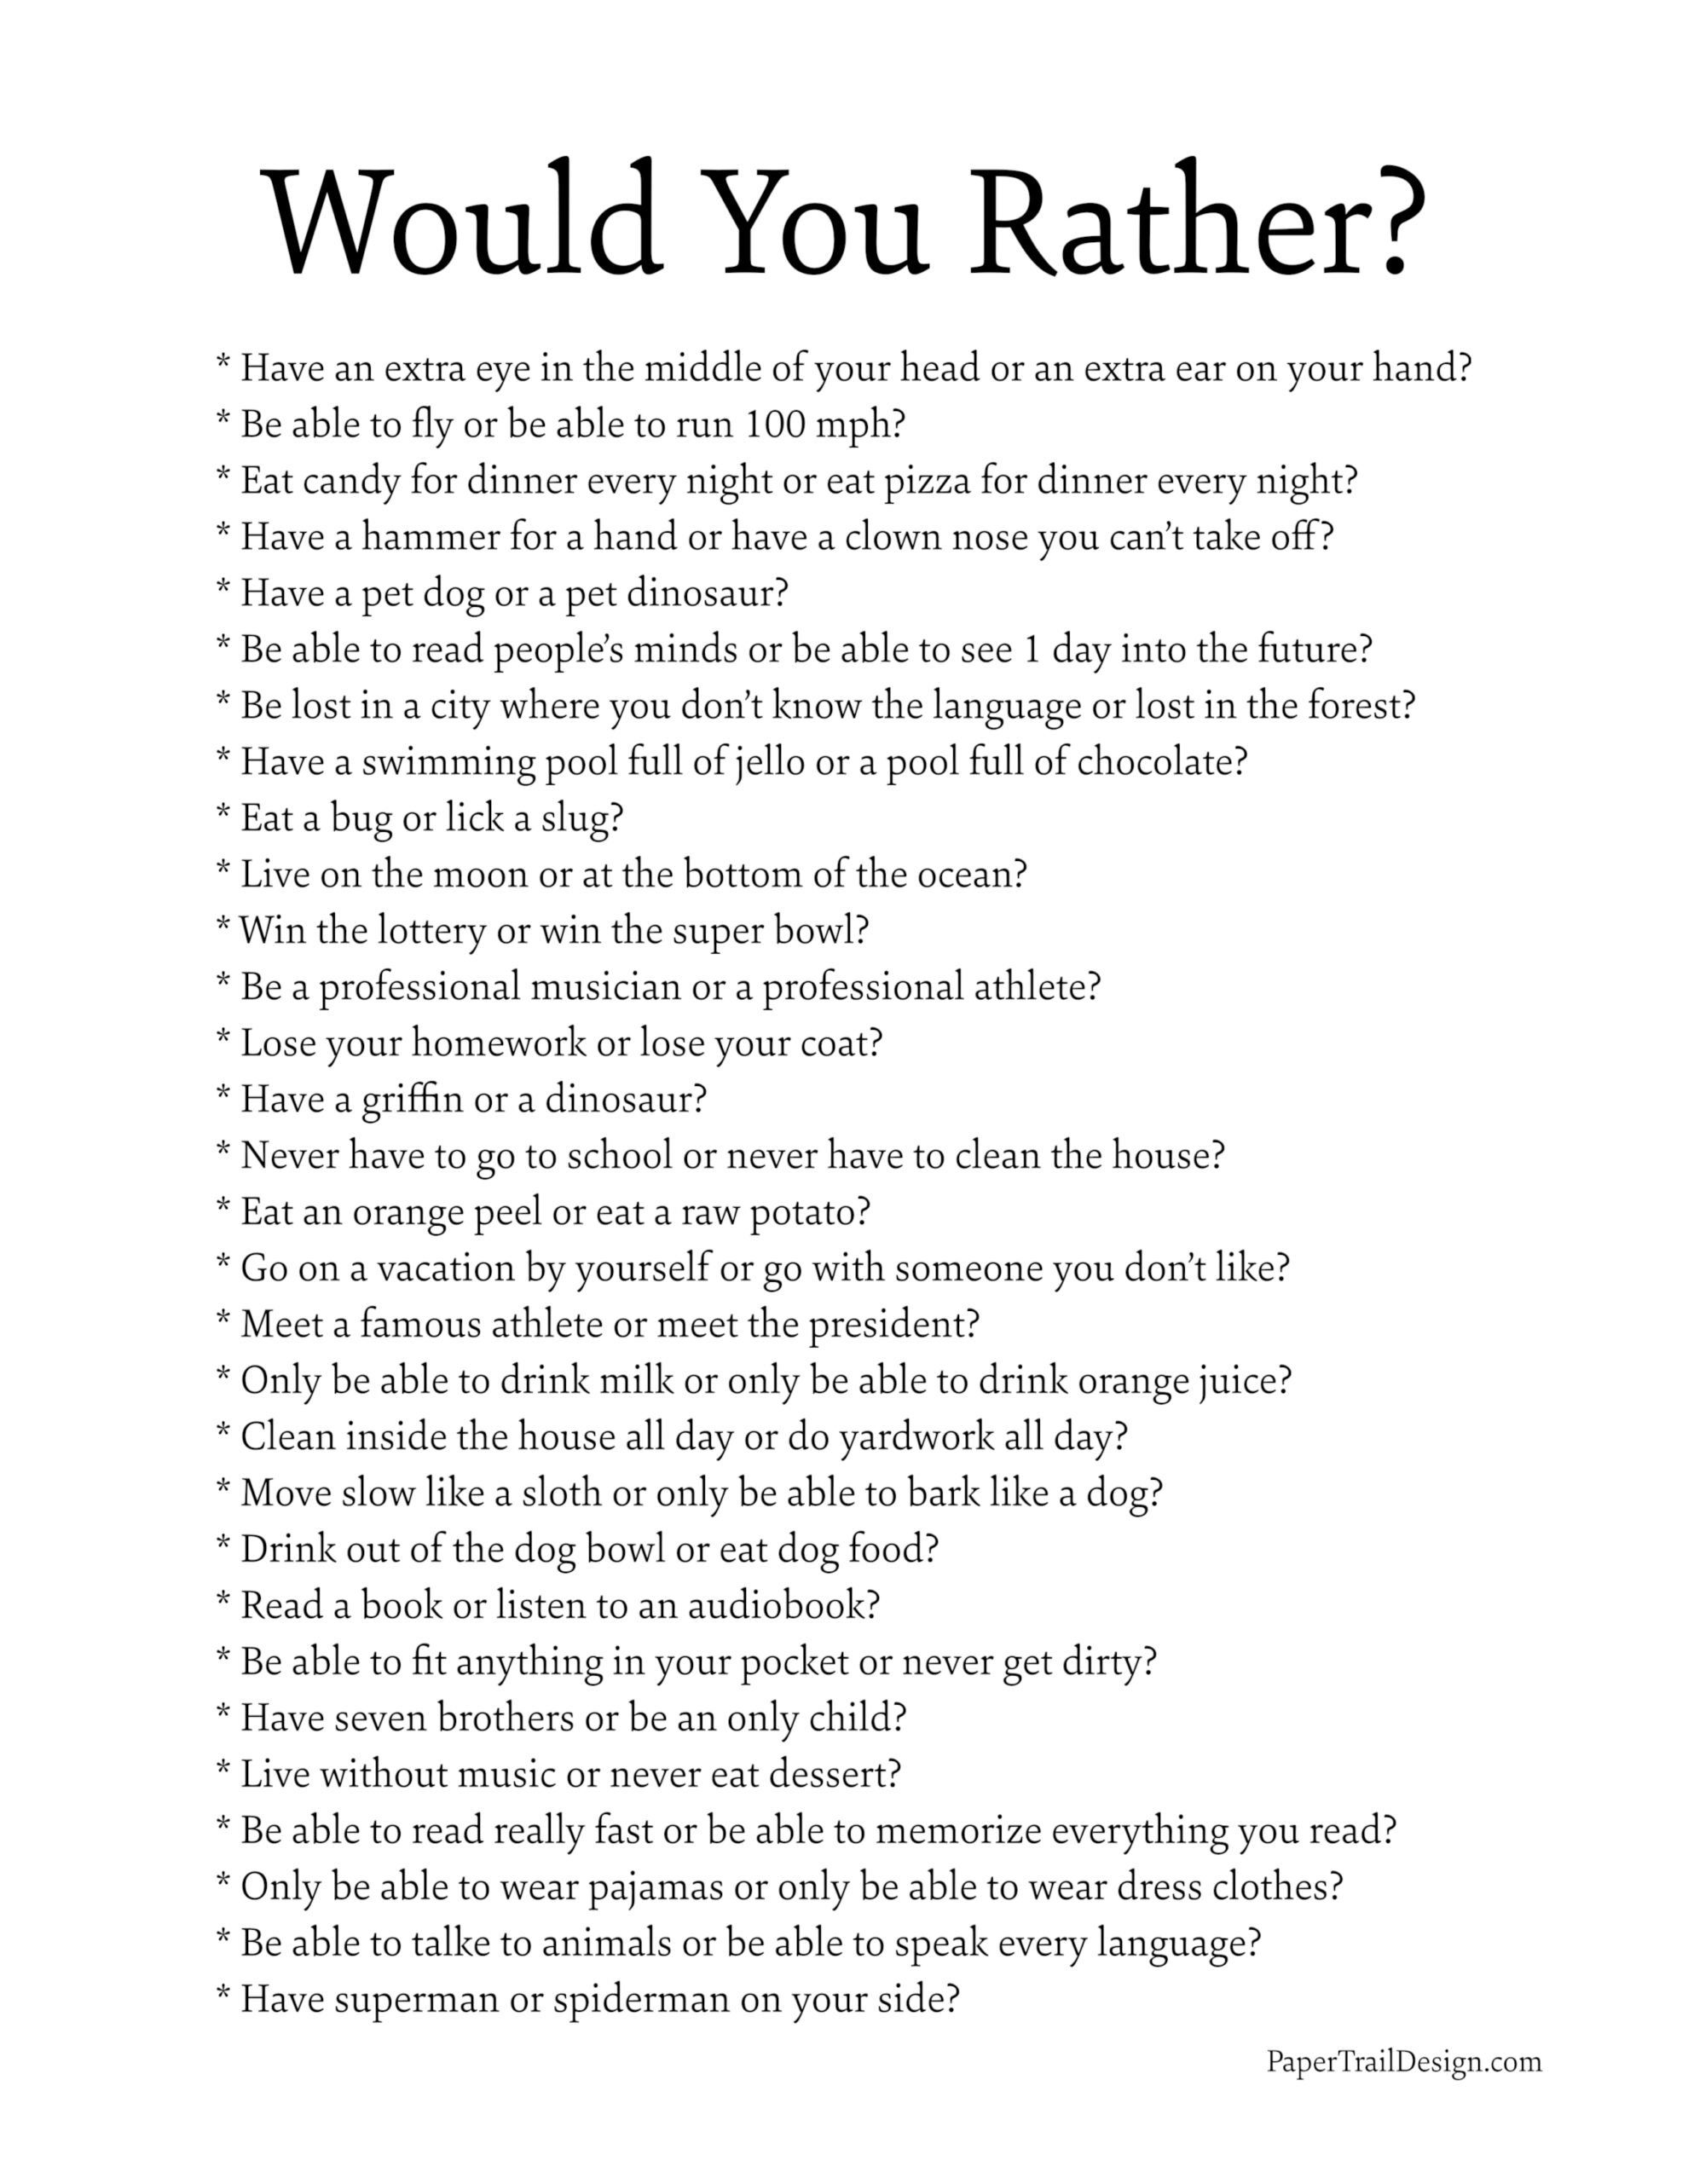 80 Good Would You Rather Questions for Kids - Days With Grey